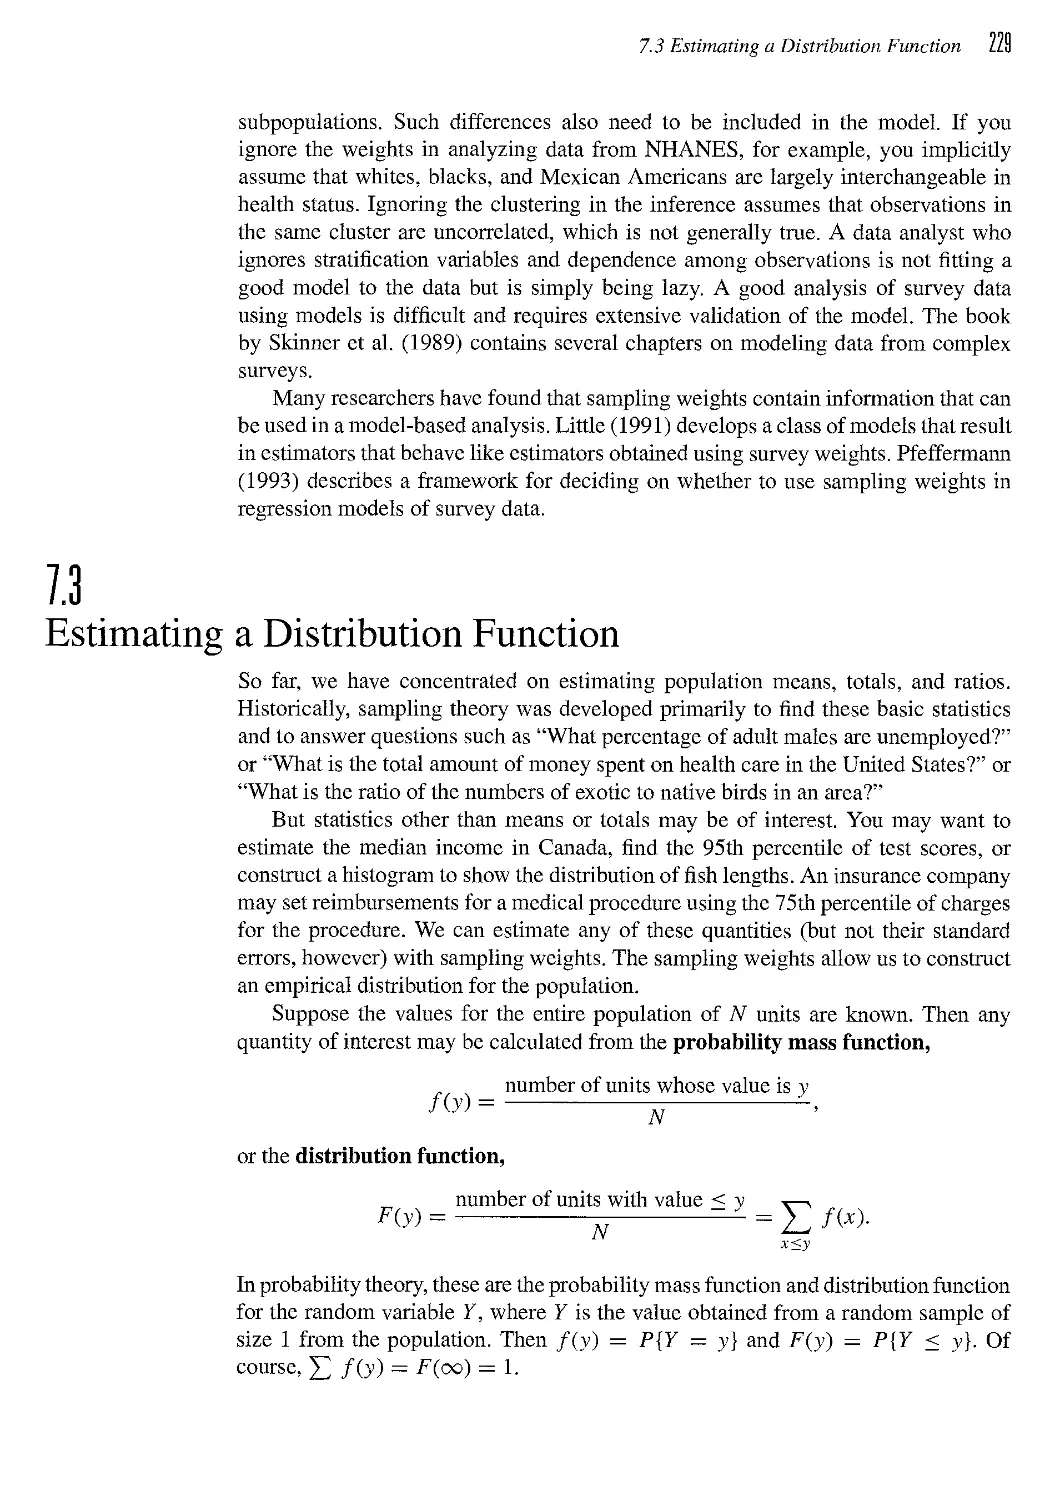 7.3 Estimating a Distribution Function